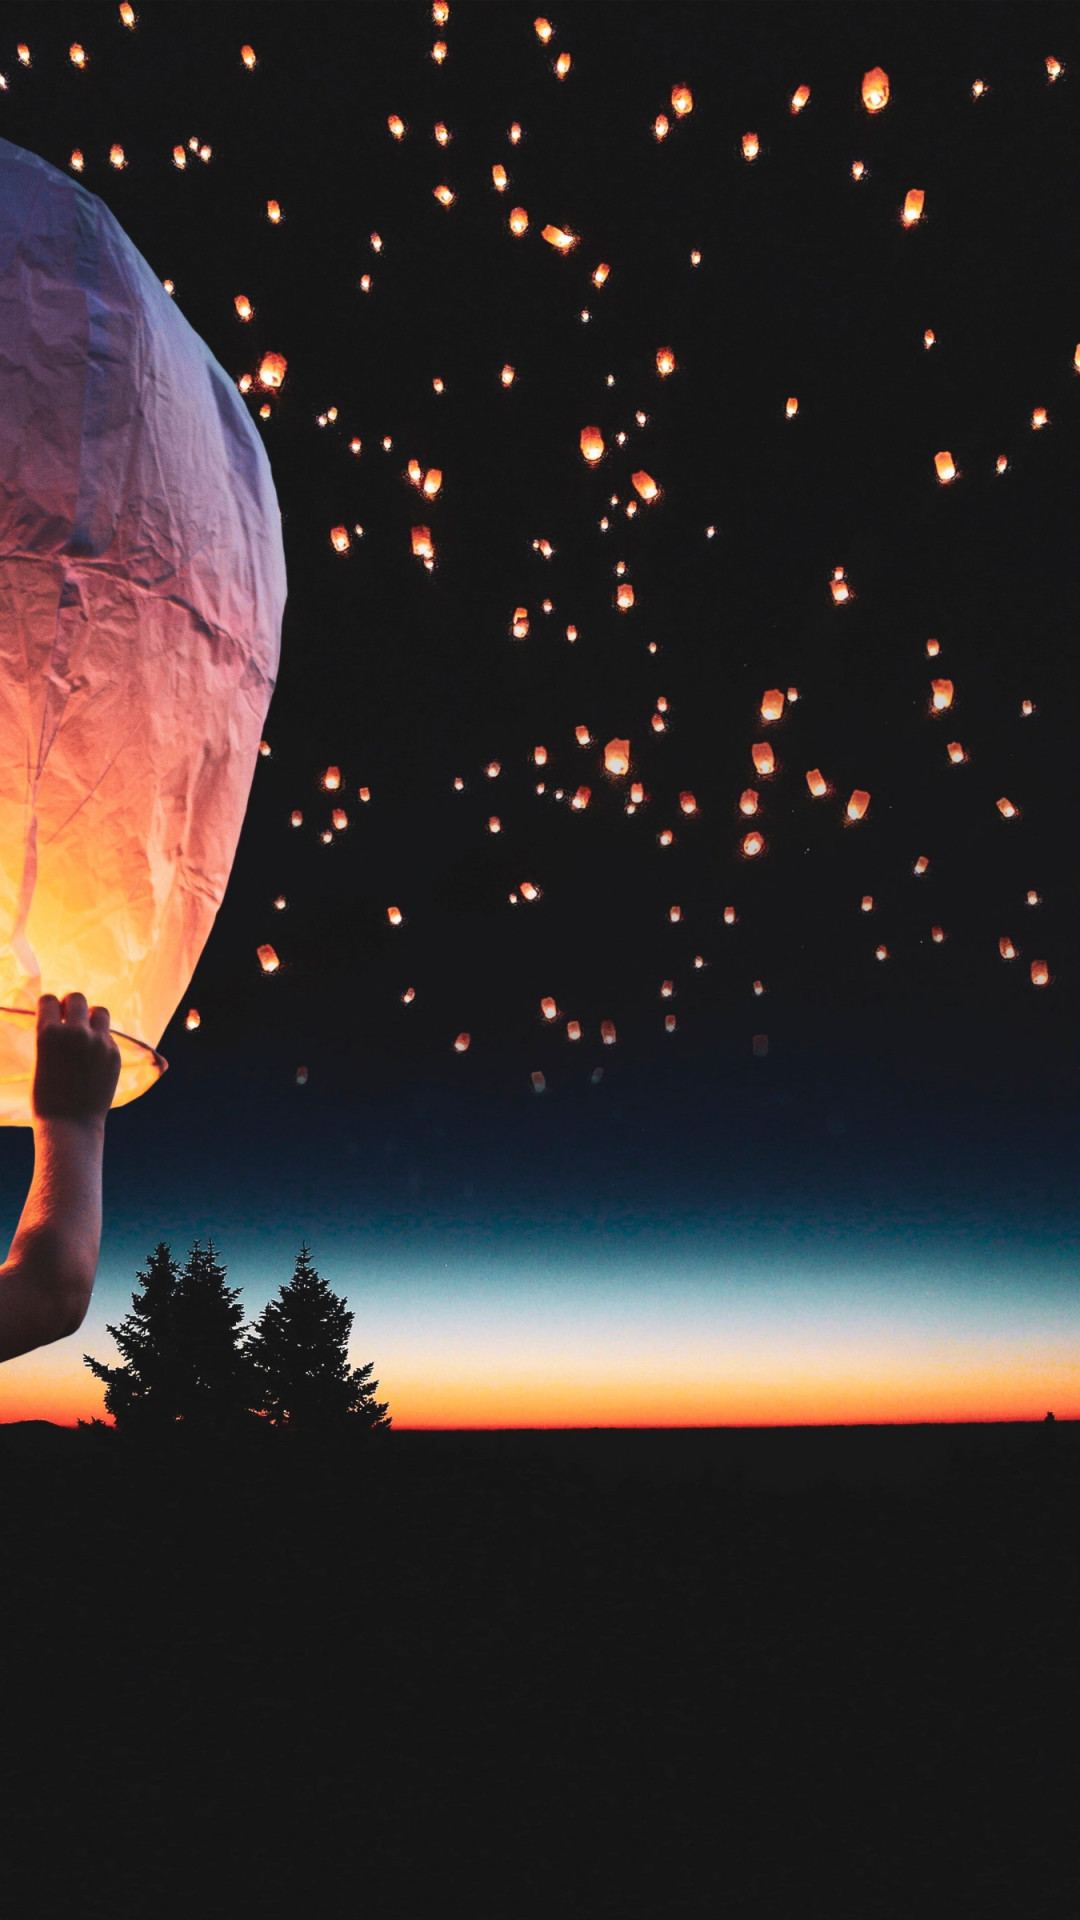 Download wallpaper: Lanterns floating on the night sky 1080x1920